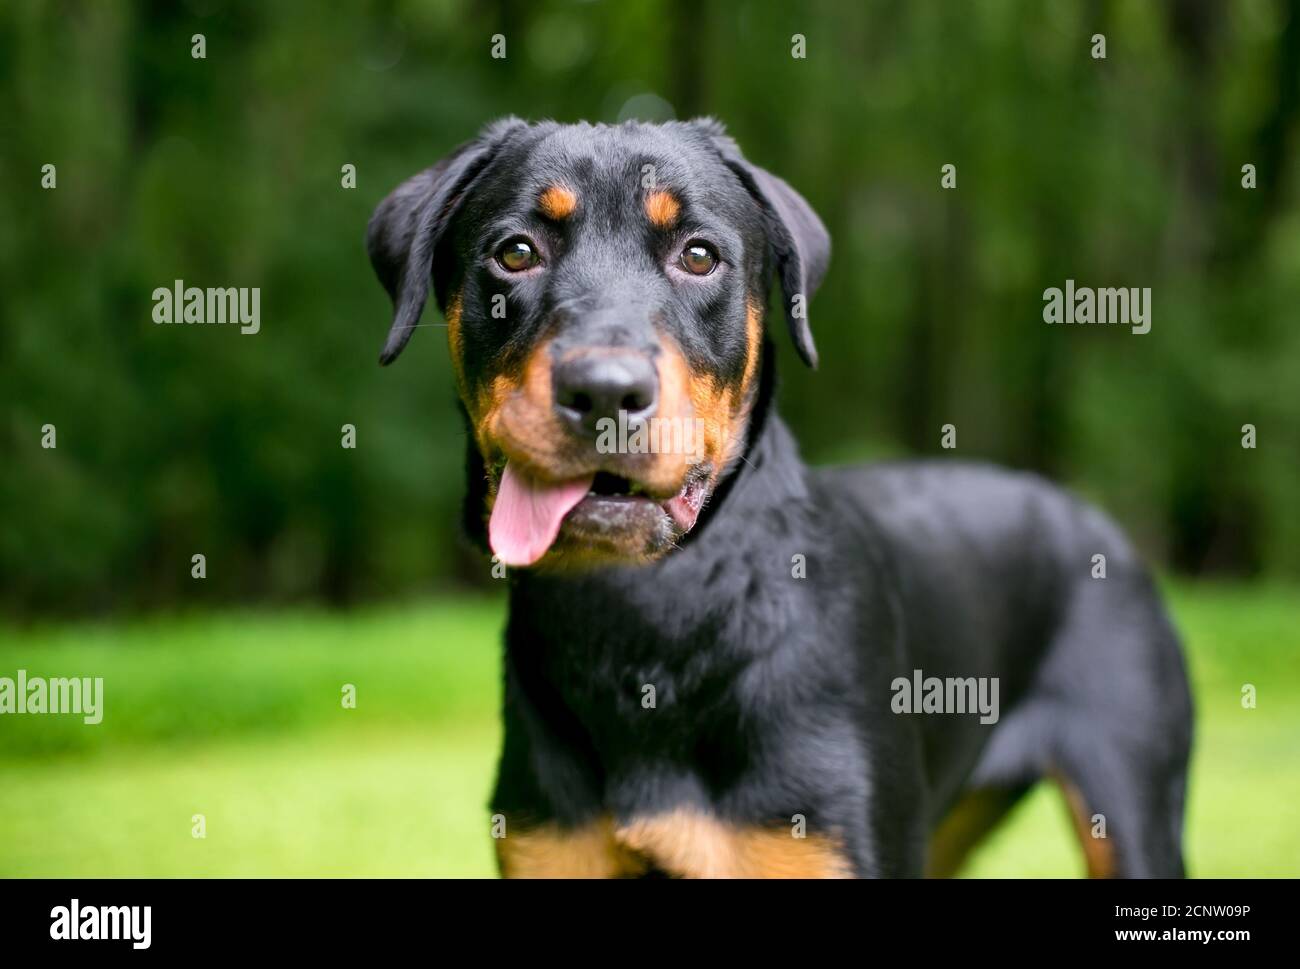 A Rottweiler dog making a funny face with its tongue hanging out of its mouth Stock Photo